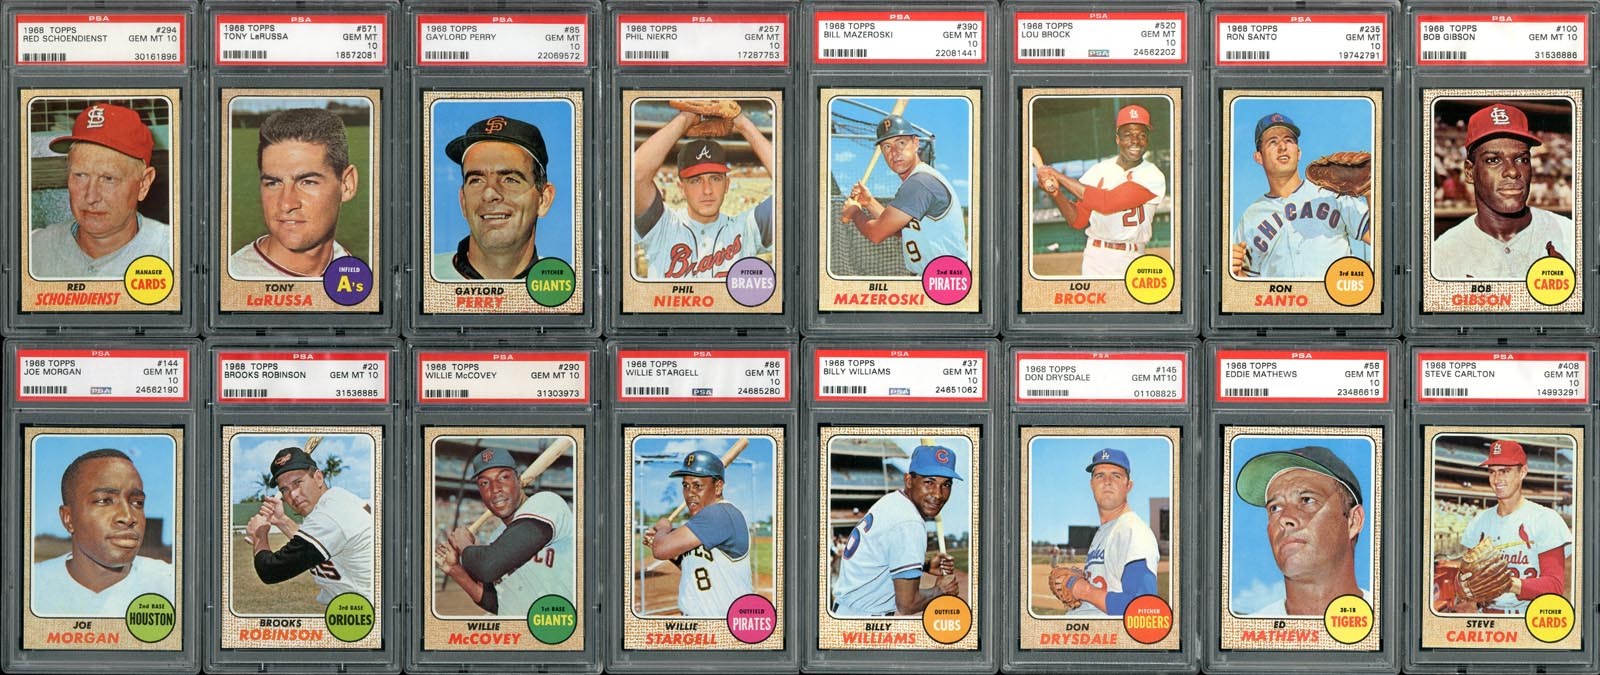 Baseball and Trading Cards - 1968 Topps Hall of Famer PSA GEM MINT 10 Collection (16)